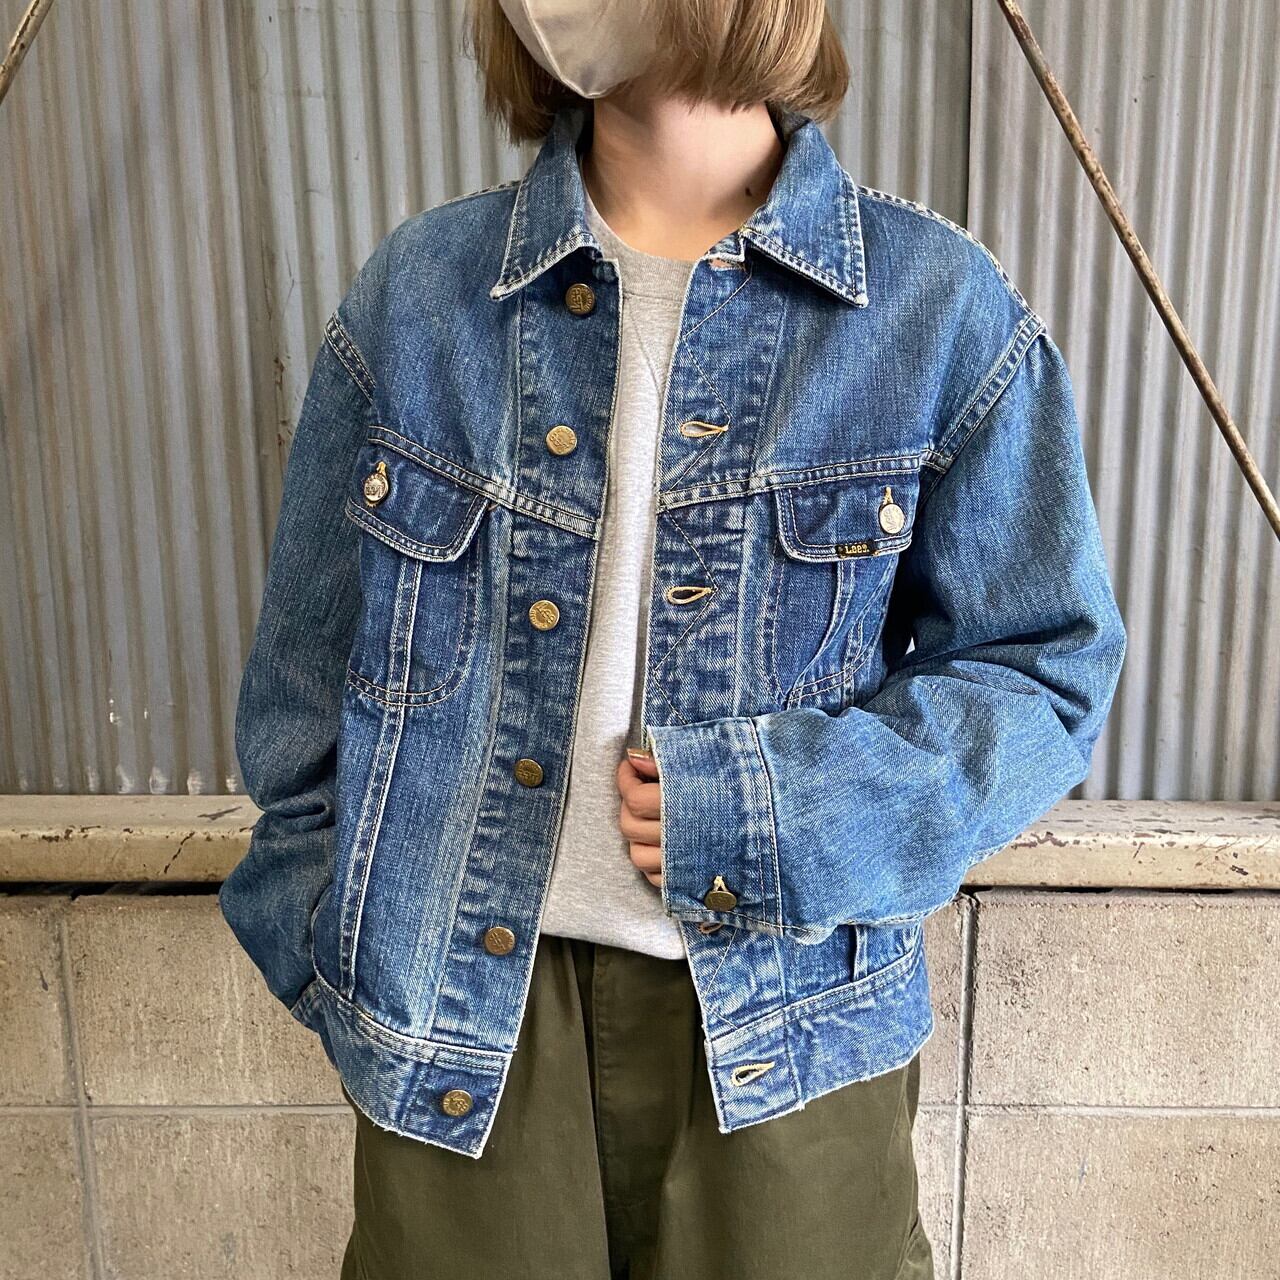 Incase you need an oversized denim jacket, we have the perfect one for you  ✔️ | Instagram